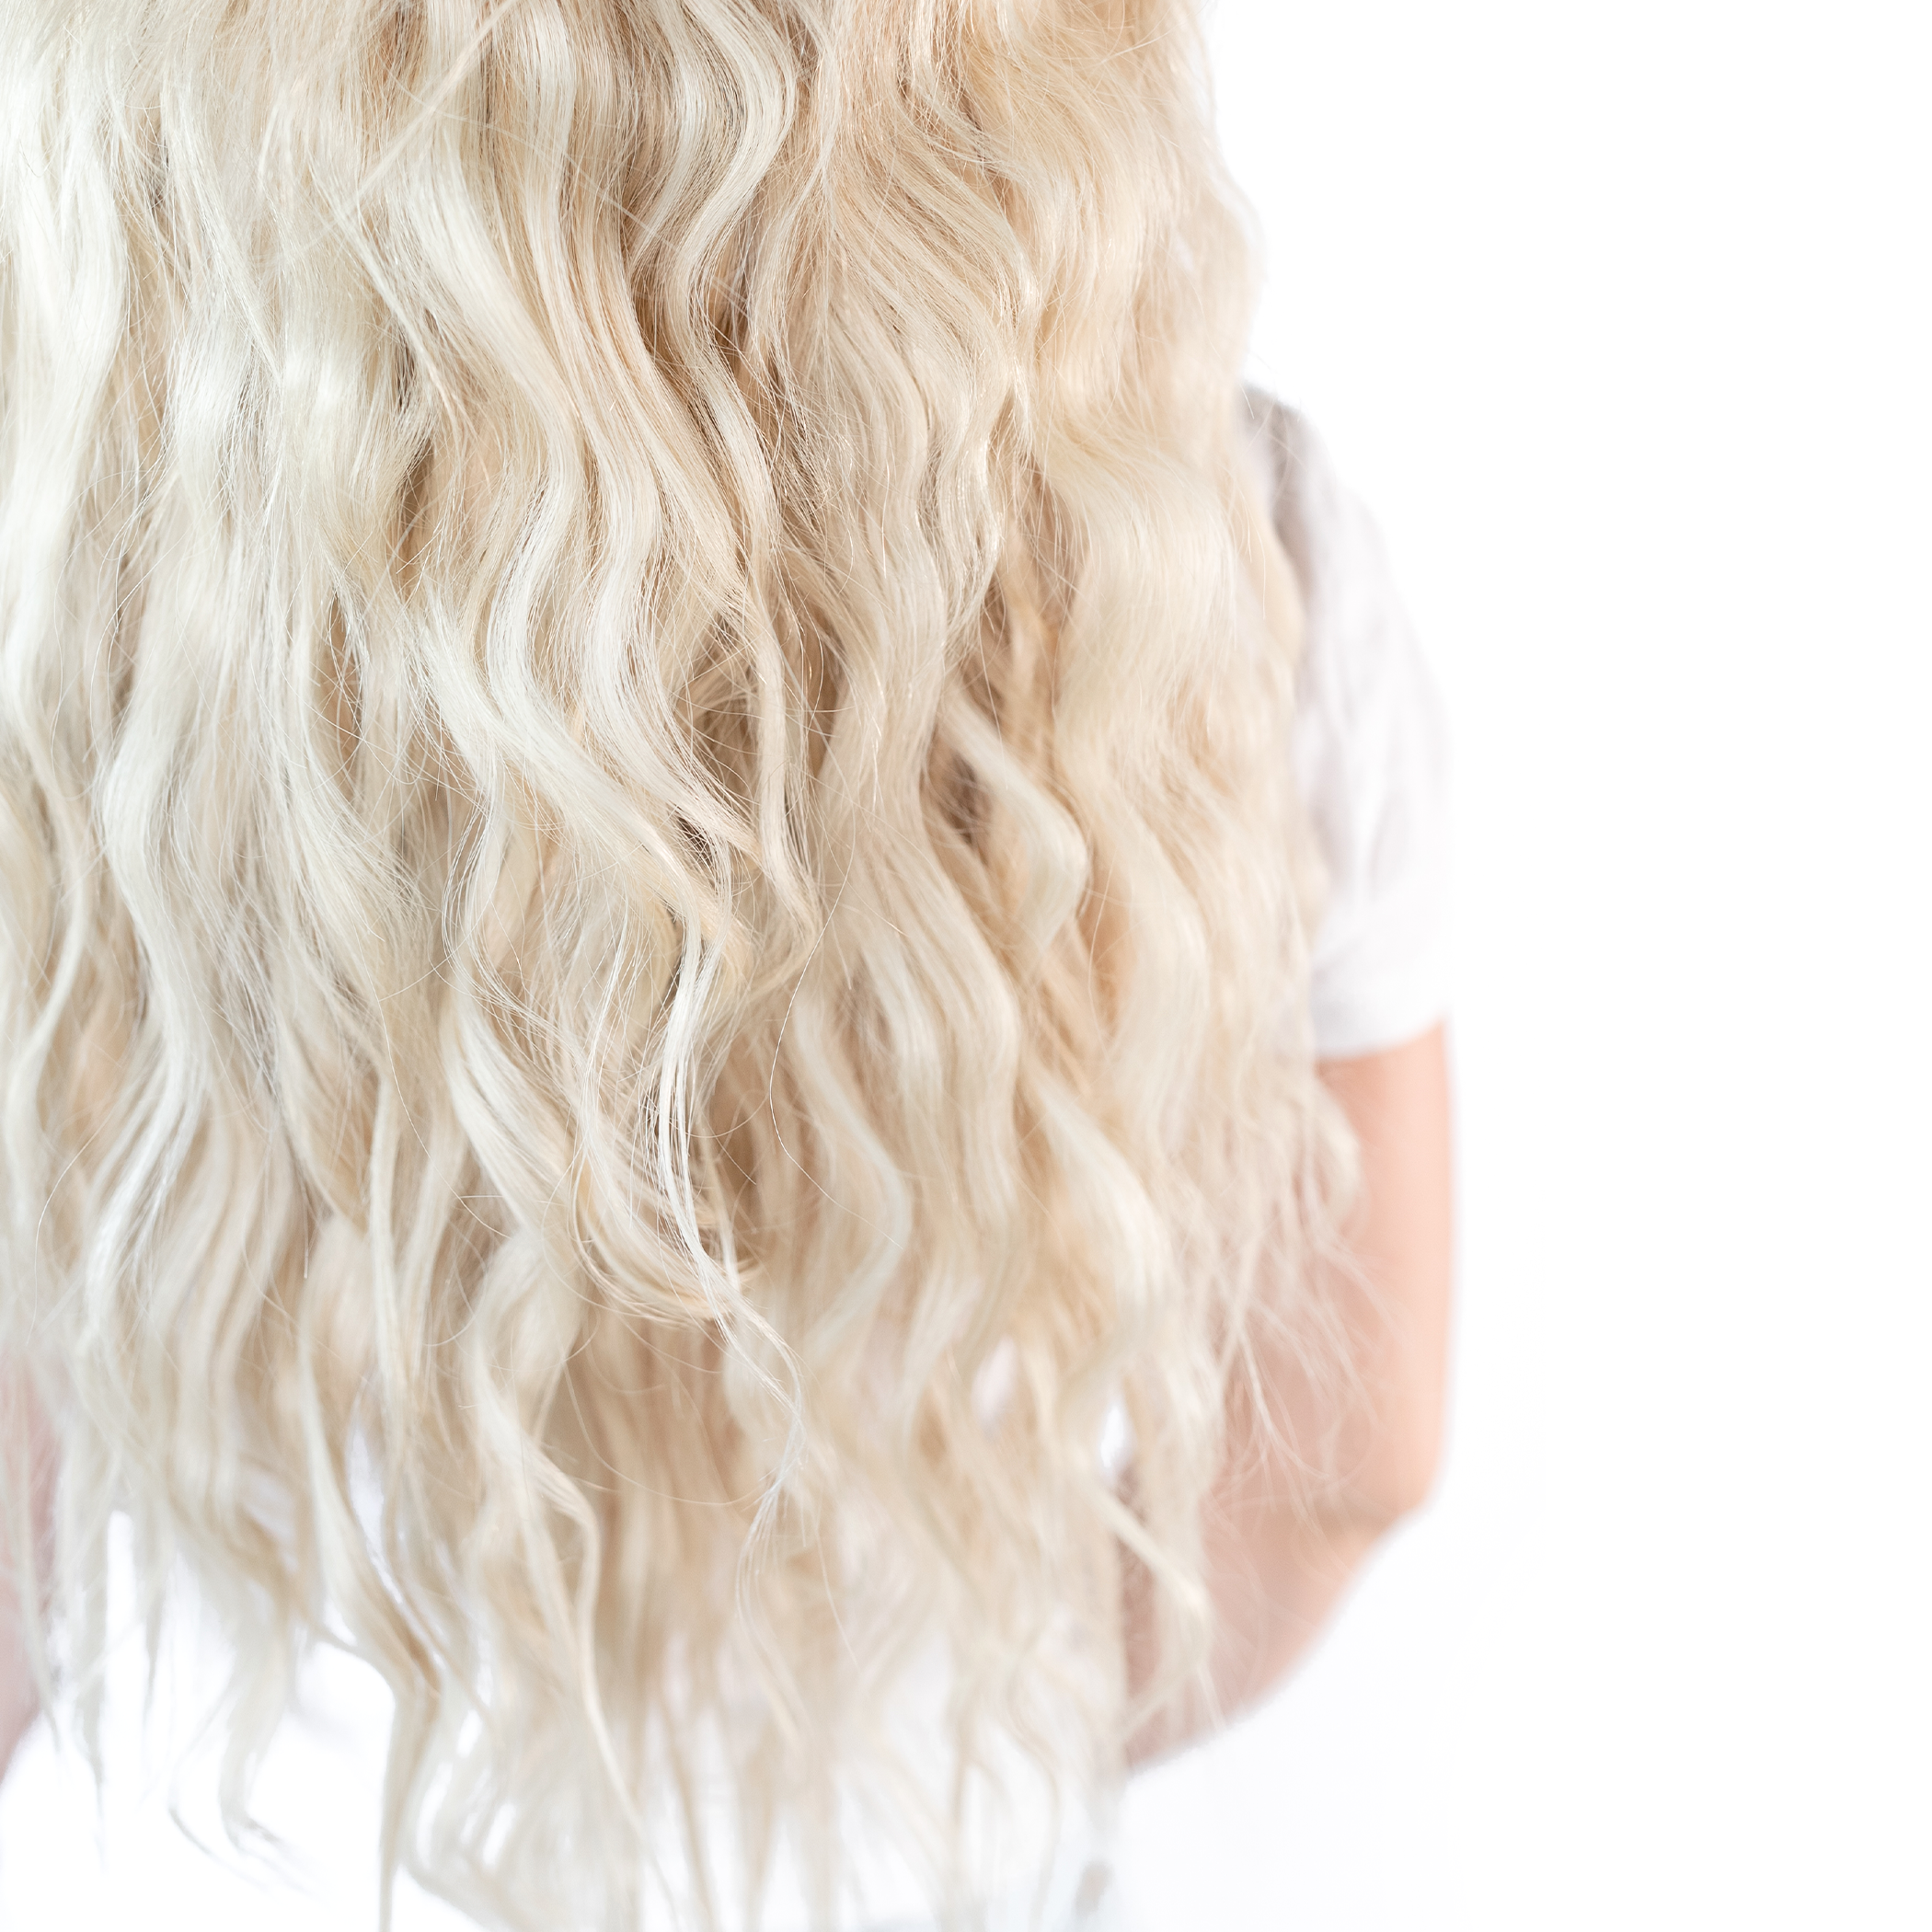 Two Minute Tuesday: Beach Waves